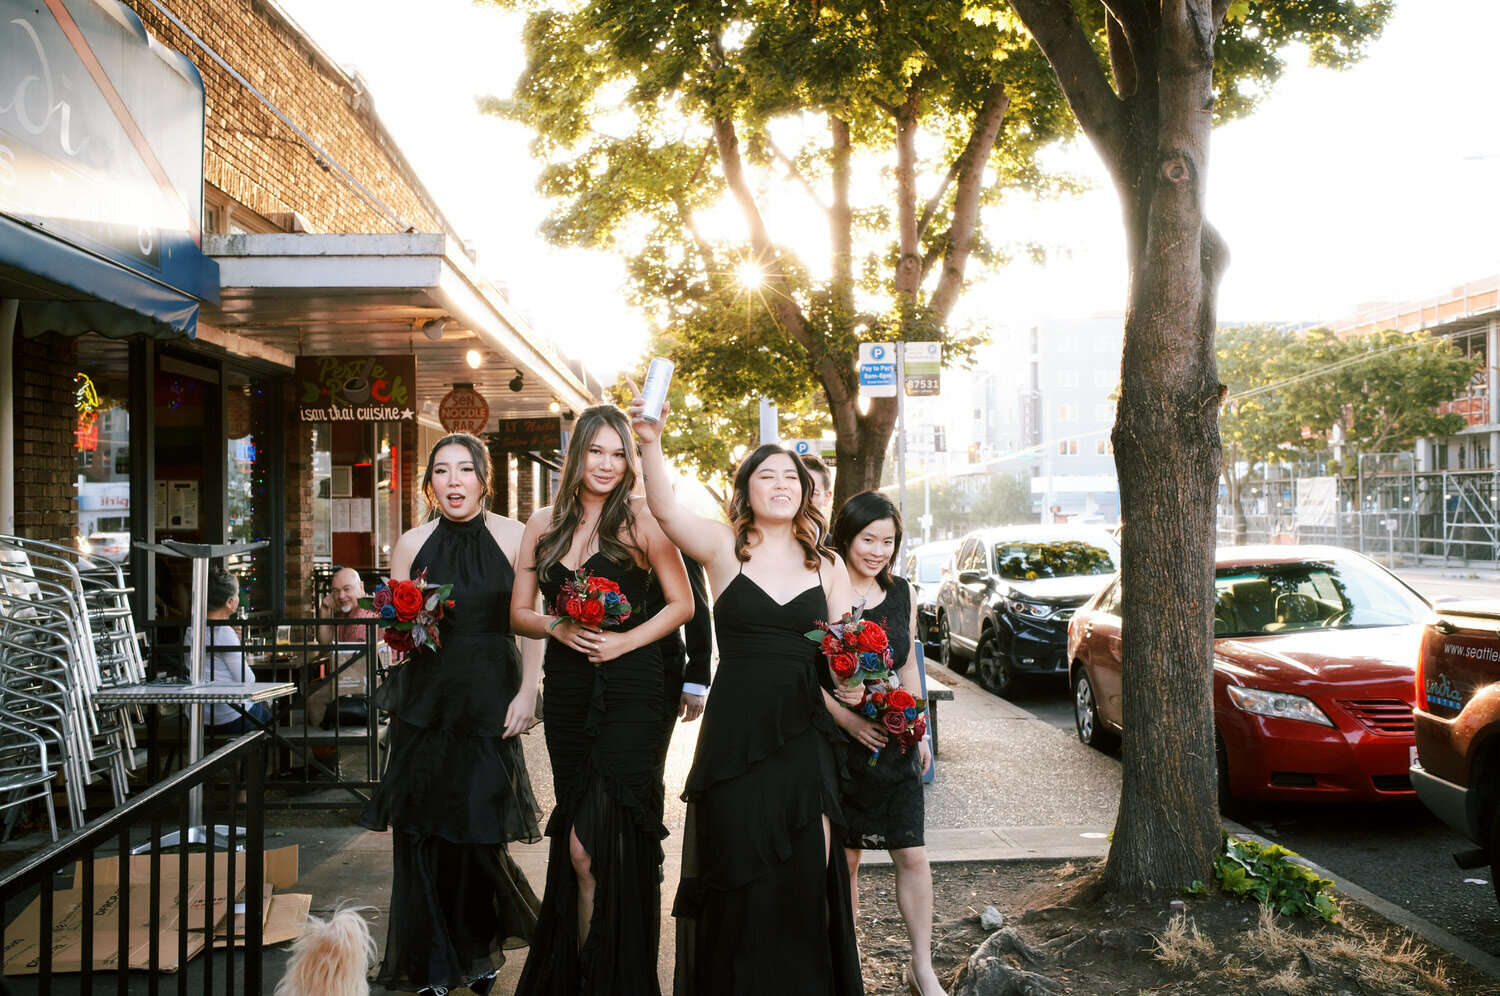 Bridesmaids celebrate as they walk down a Seattle sidewalk at sunset